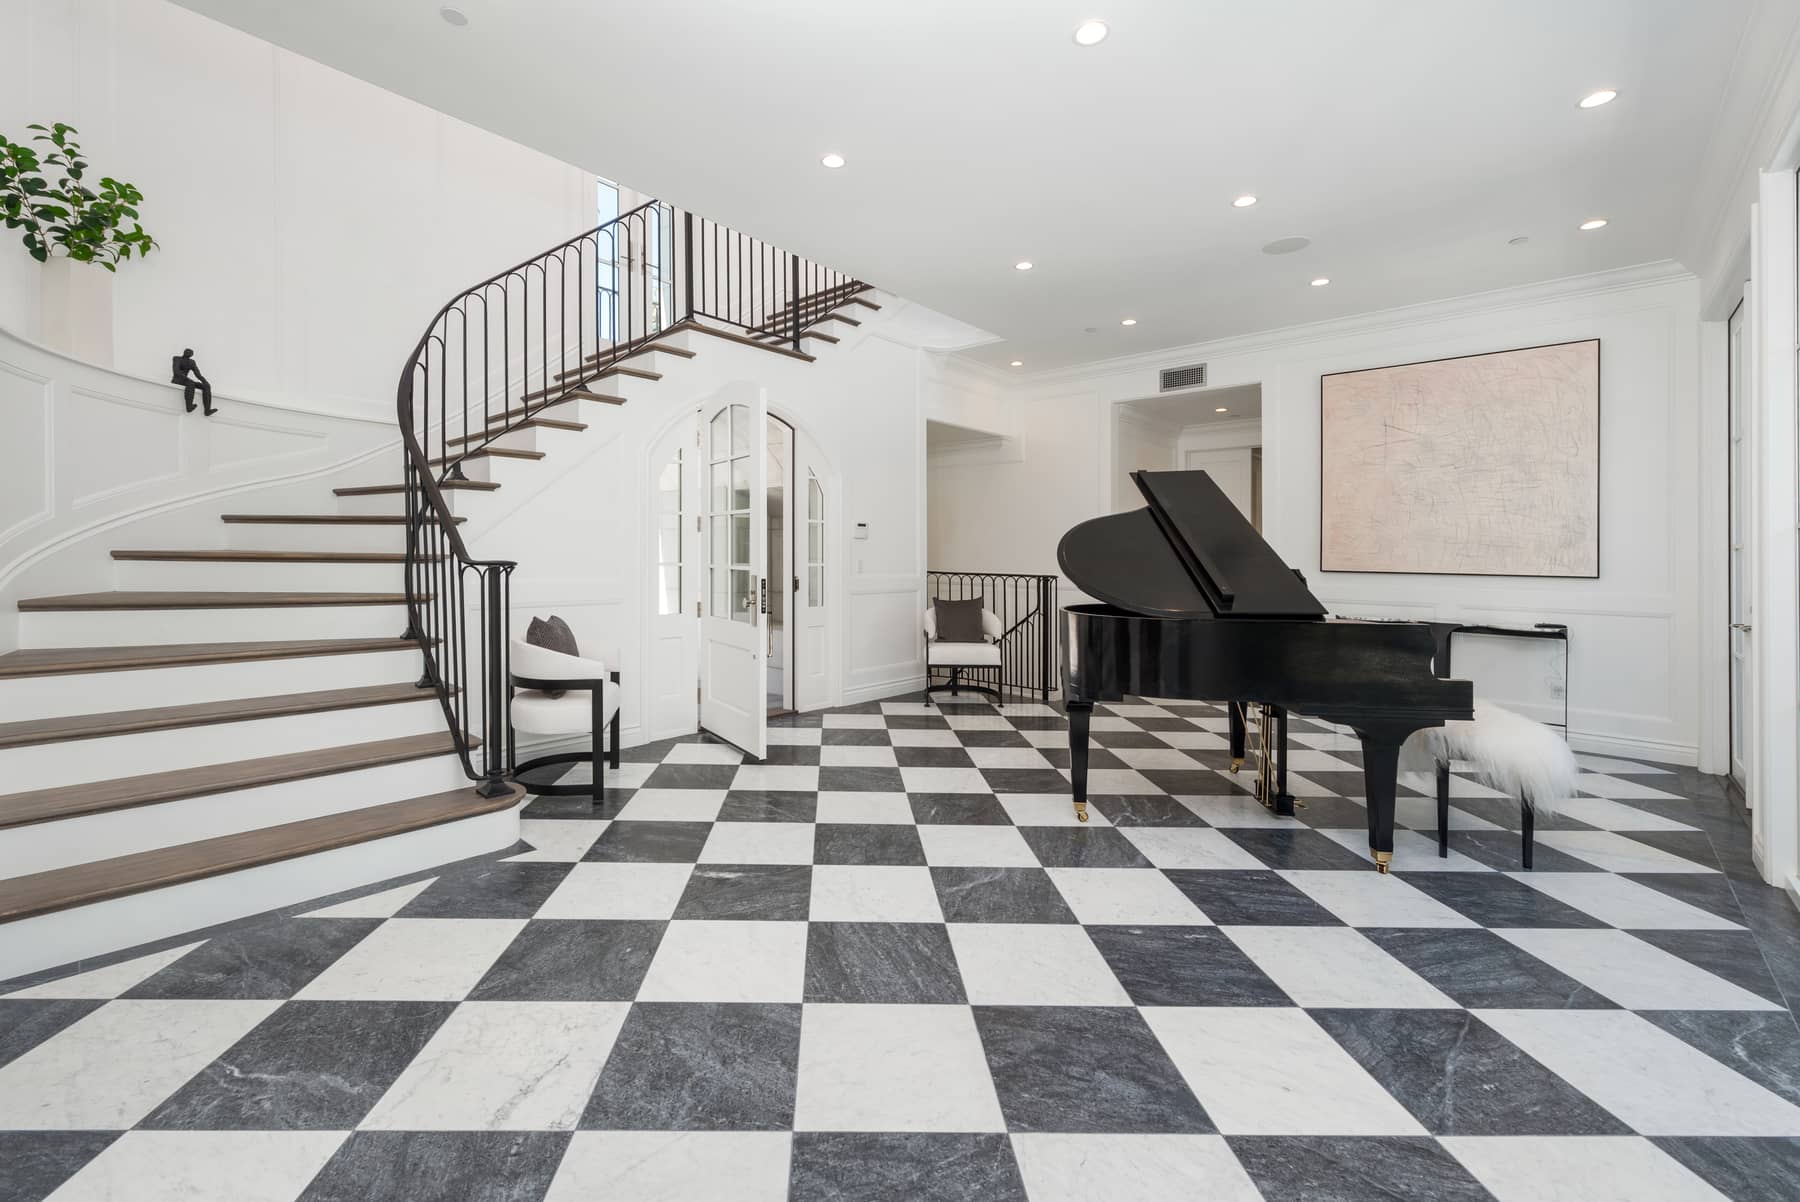 Foyer featuring black and white tile with piano and grand staircase